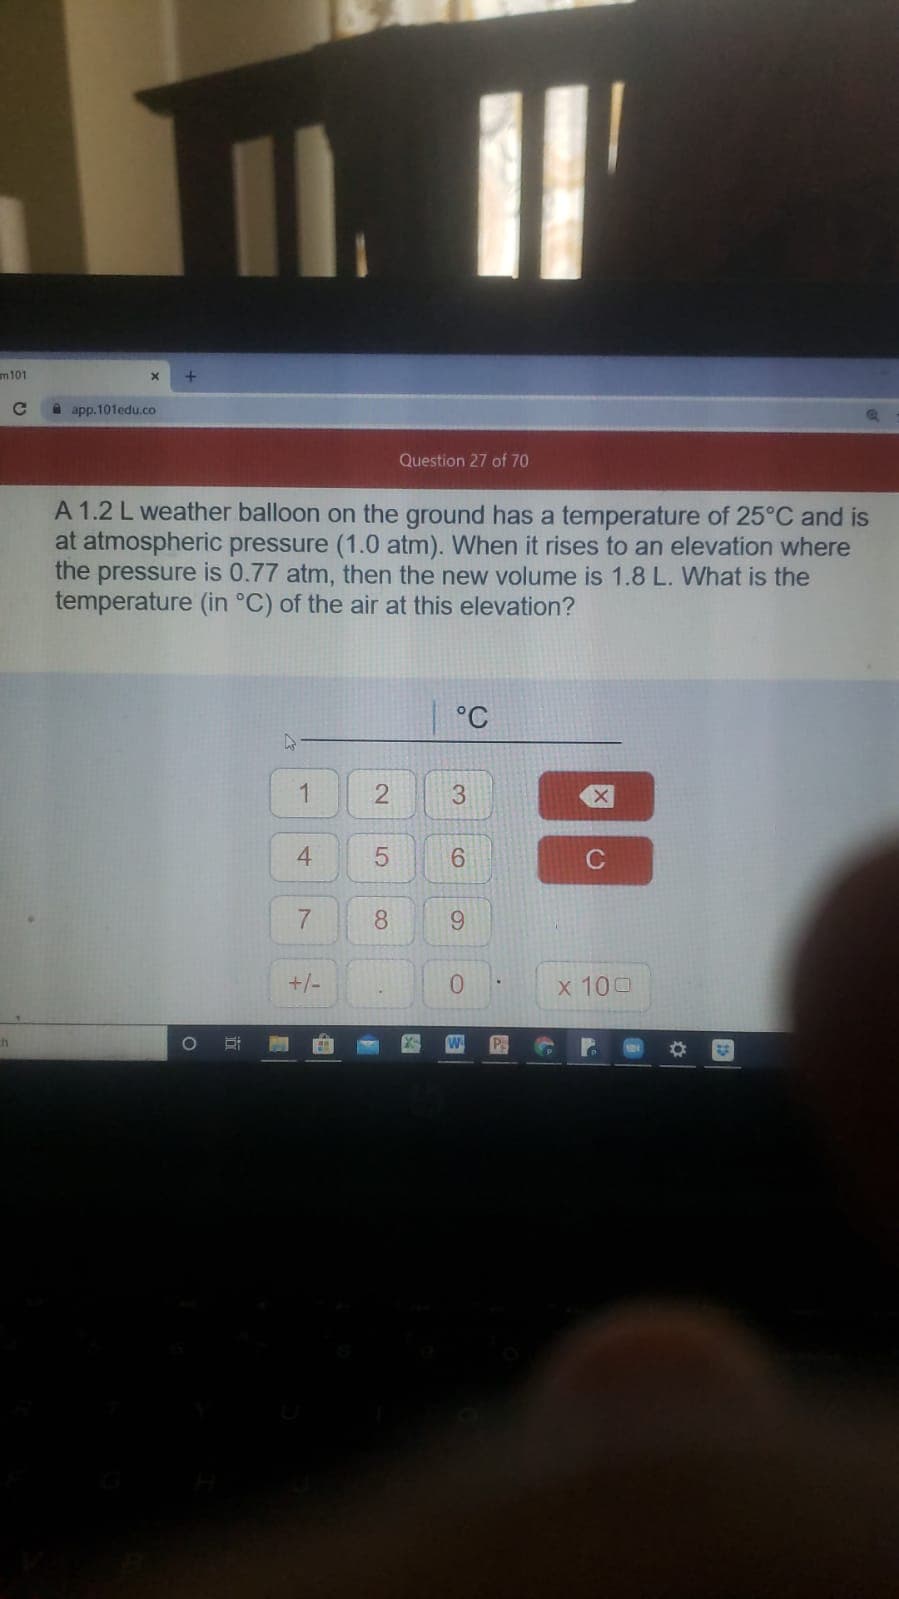 A 1.2 L weather balloon on the ground has a temperature of 25°C and is
at atmospheric pressure (1.0 atm). When it rises to an elevation where
the pressure is 0.77 atm, then the new volume is 1.8 L. What is the
temperature (in °C) of the air at this elevation?
